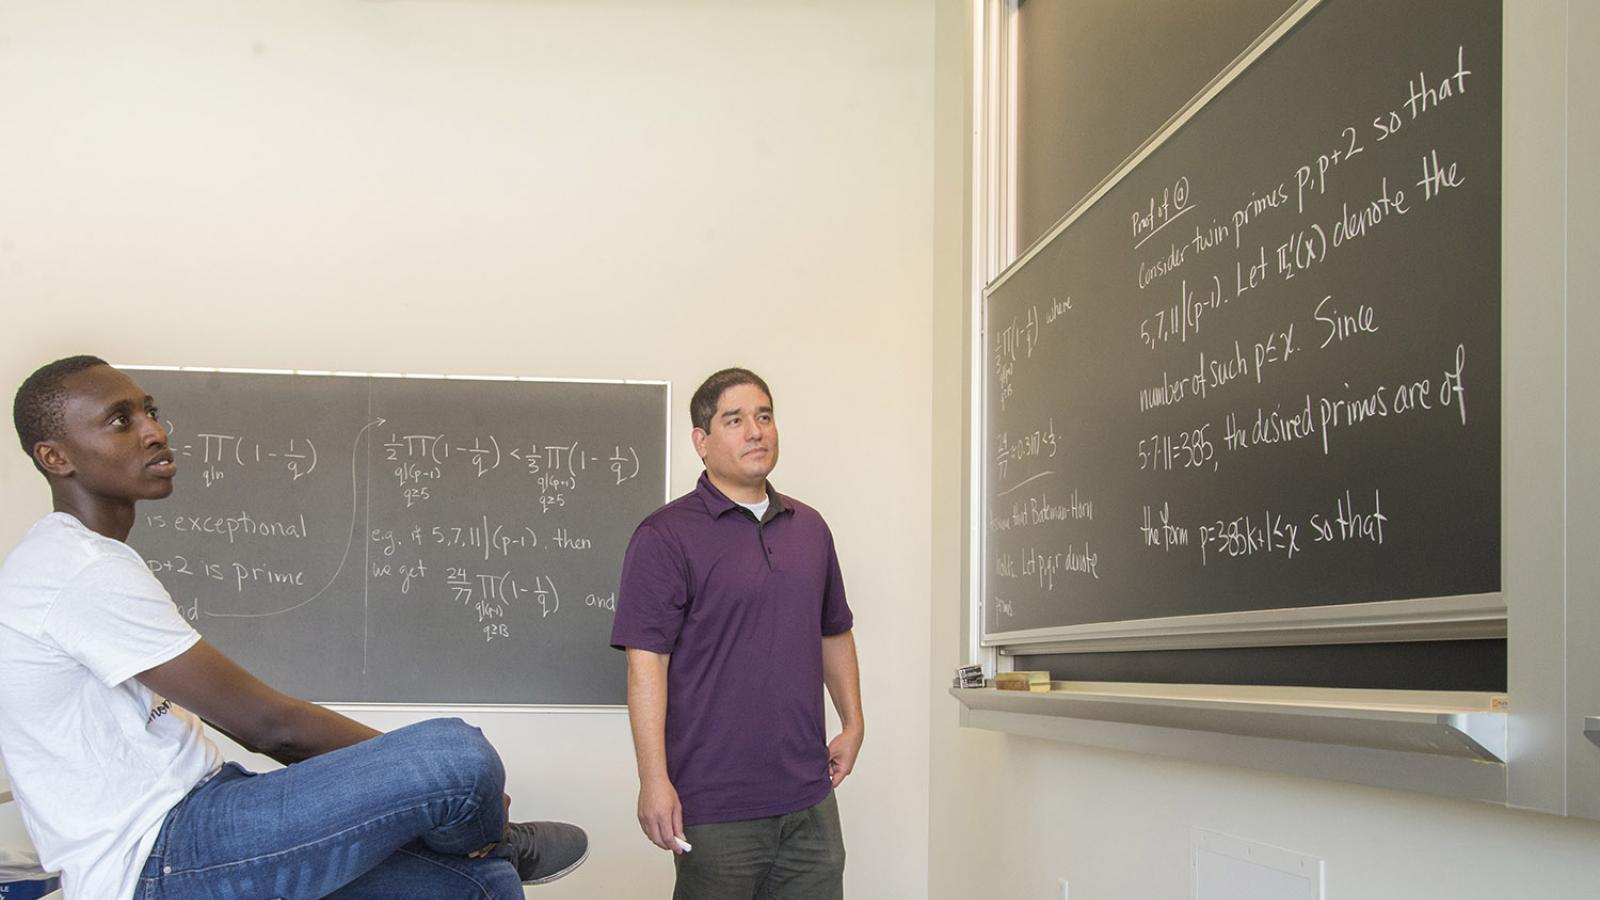 A student is sitting on a table looking at a chalkboard while a professor stands in the middle.